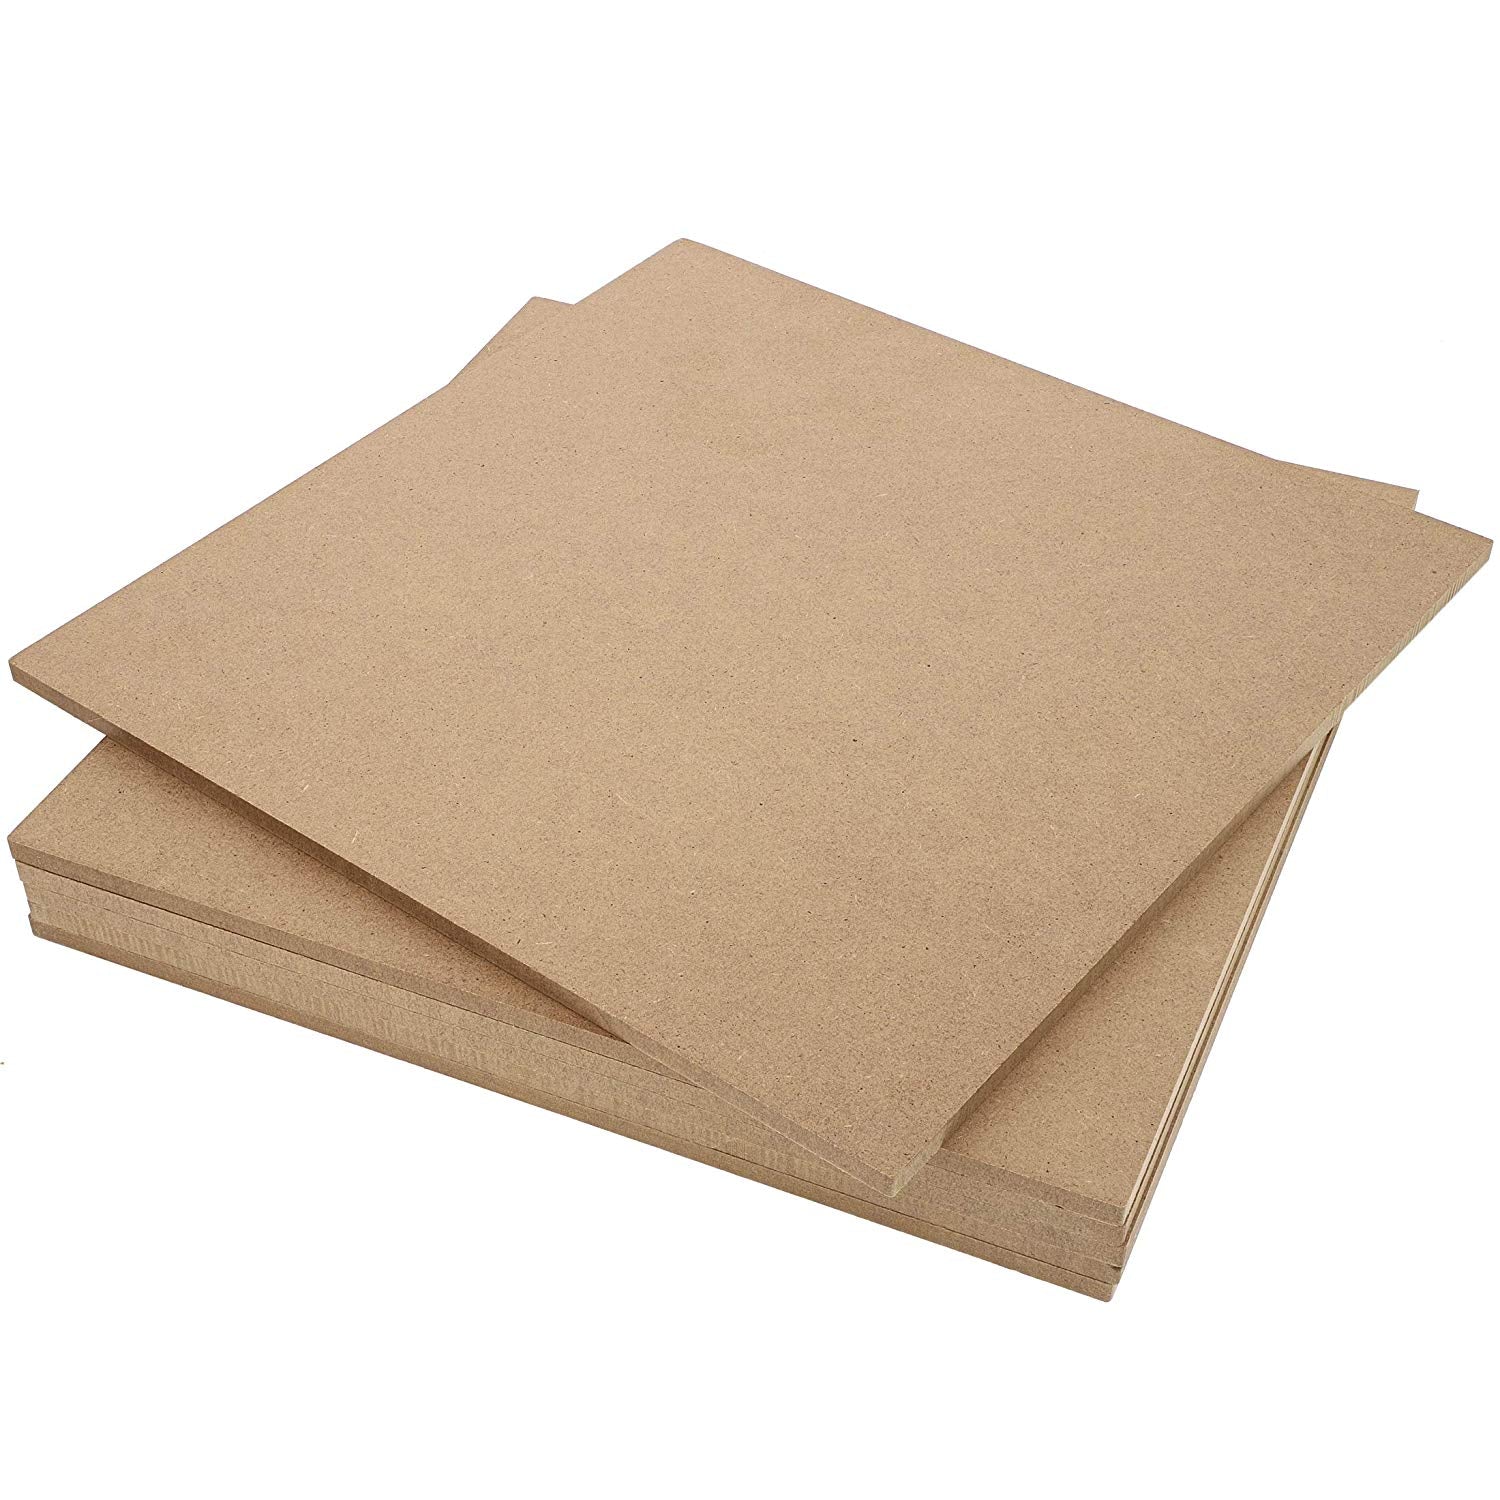 20 Pack Blank Wood Boards for Crafts, 1/4 inch Thick Square MDF Chipboard Sheets (12x12 in)